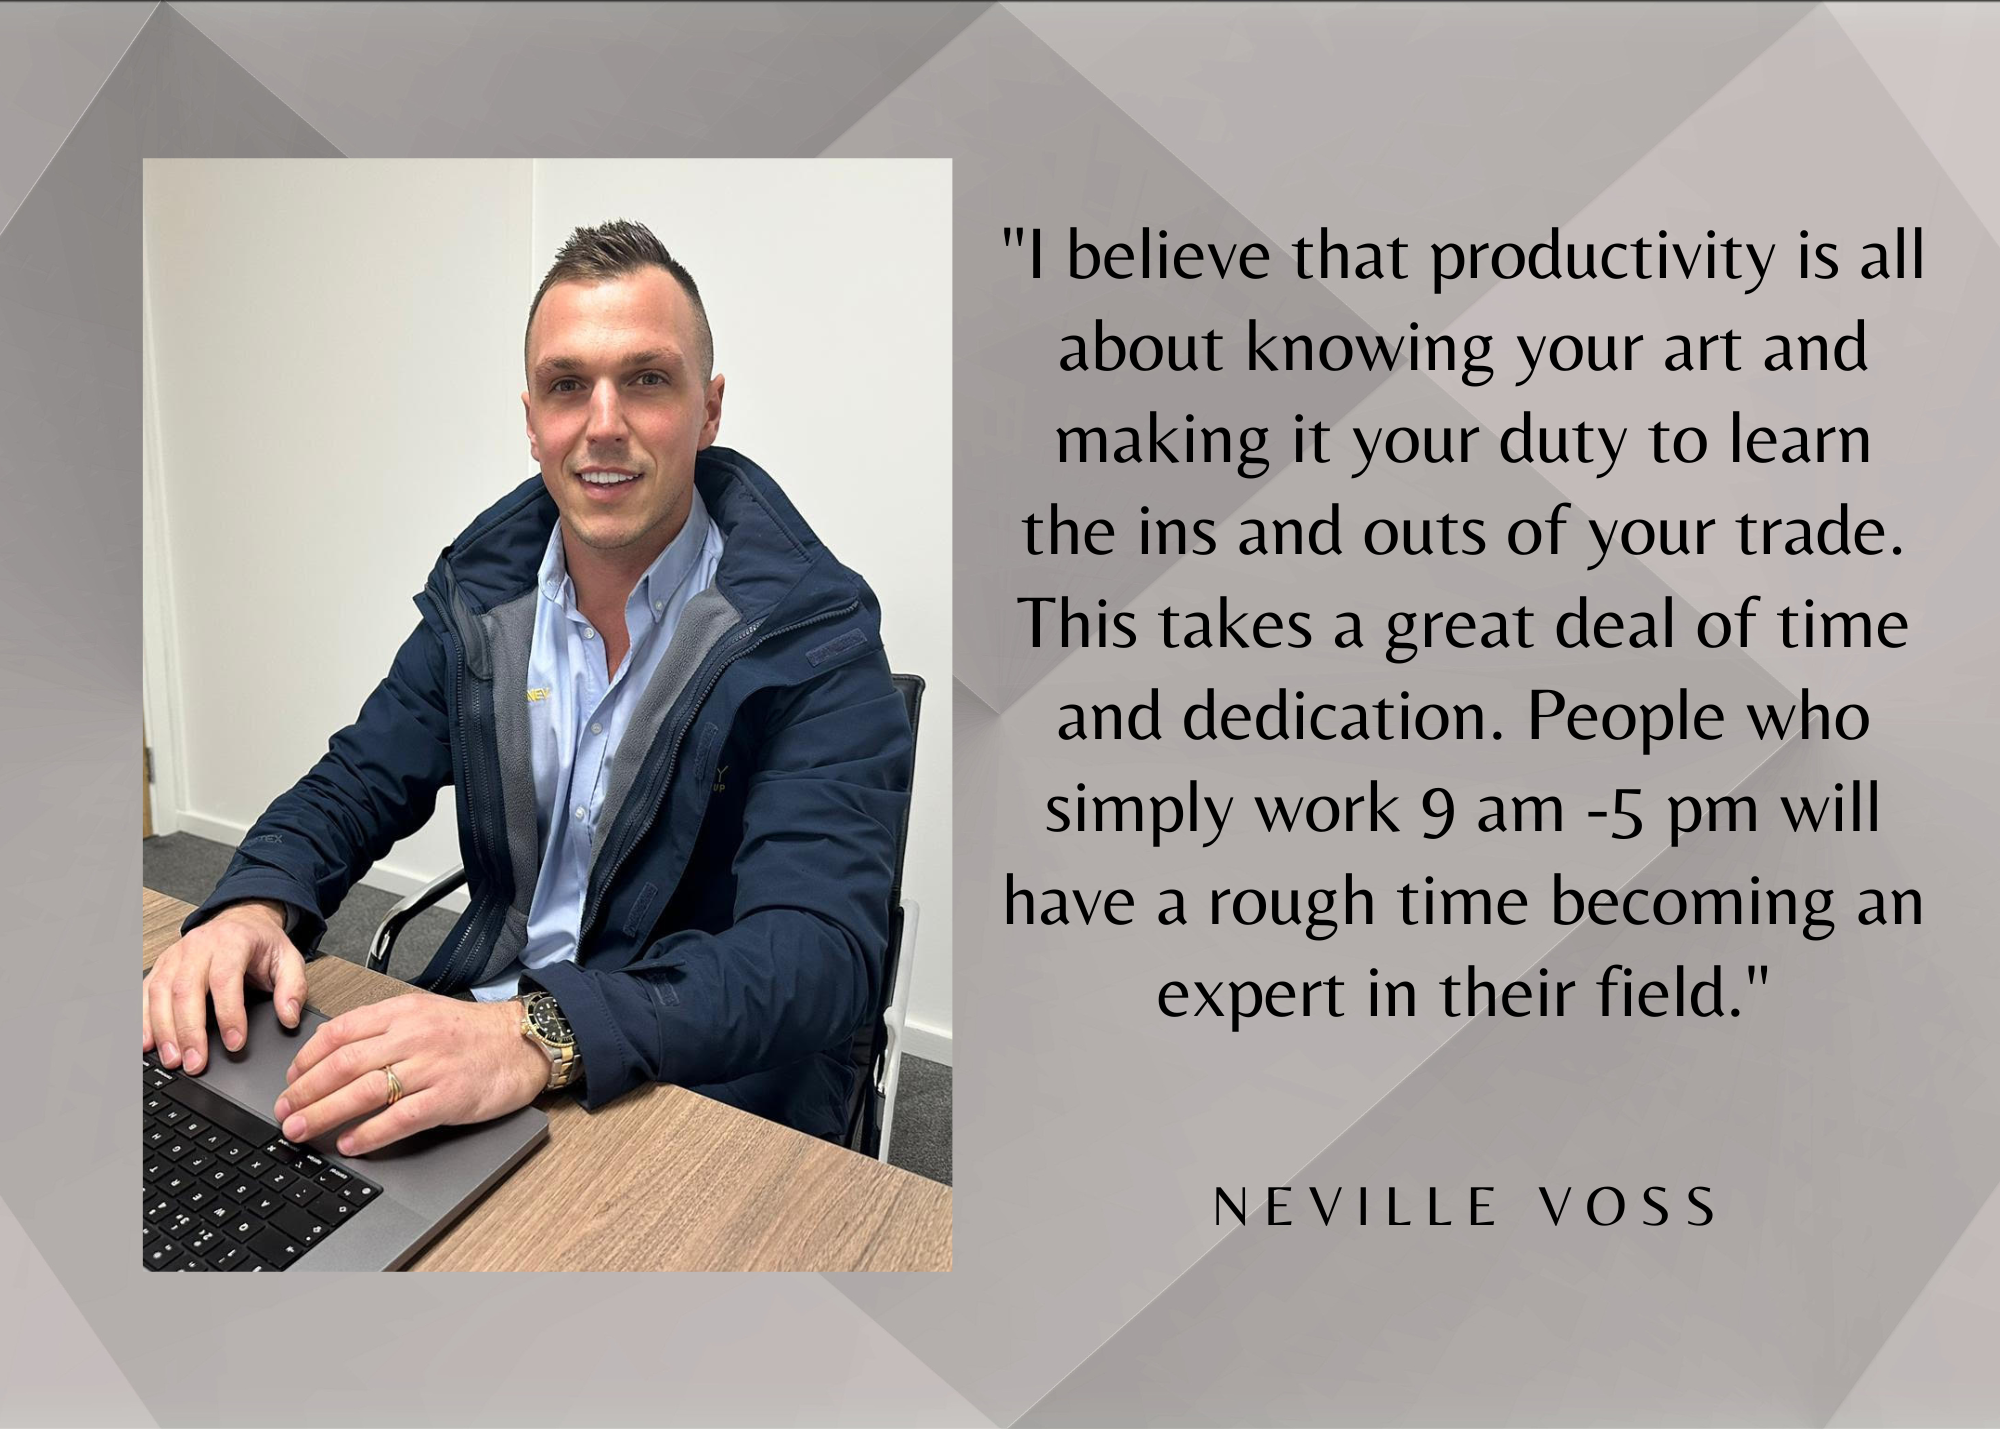 Neville Voss is the Subject of a New Interview